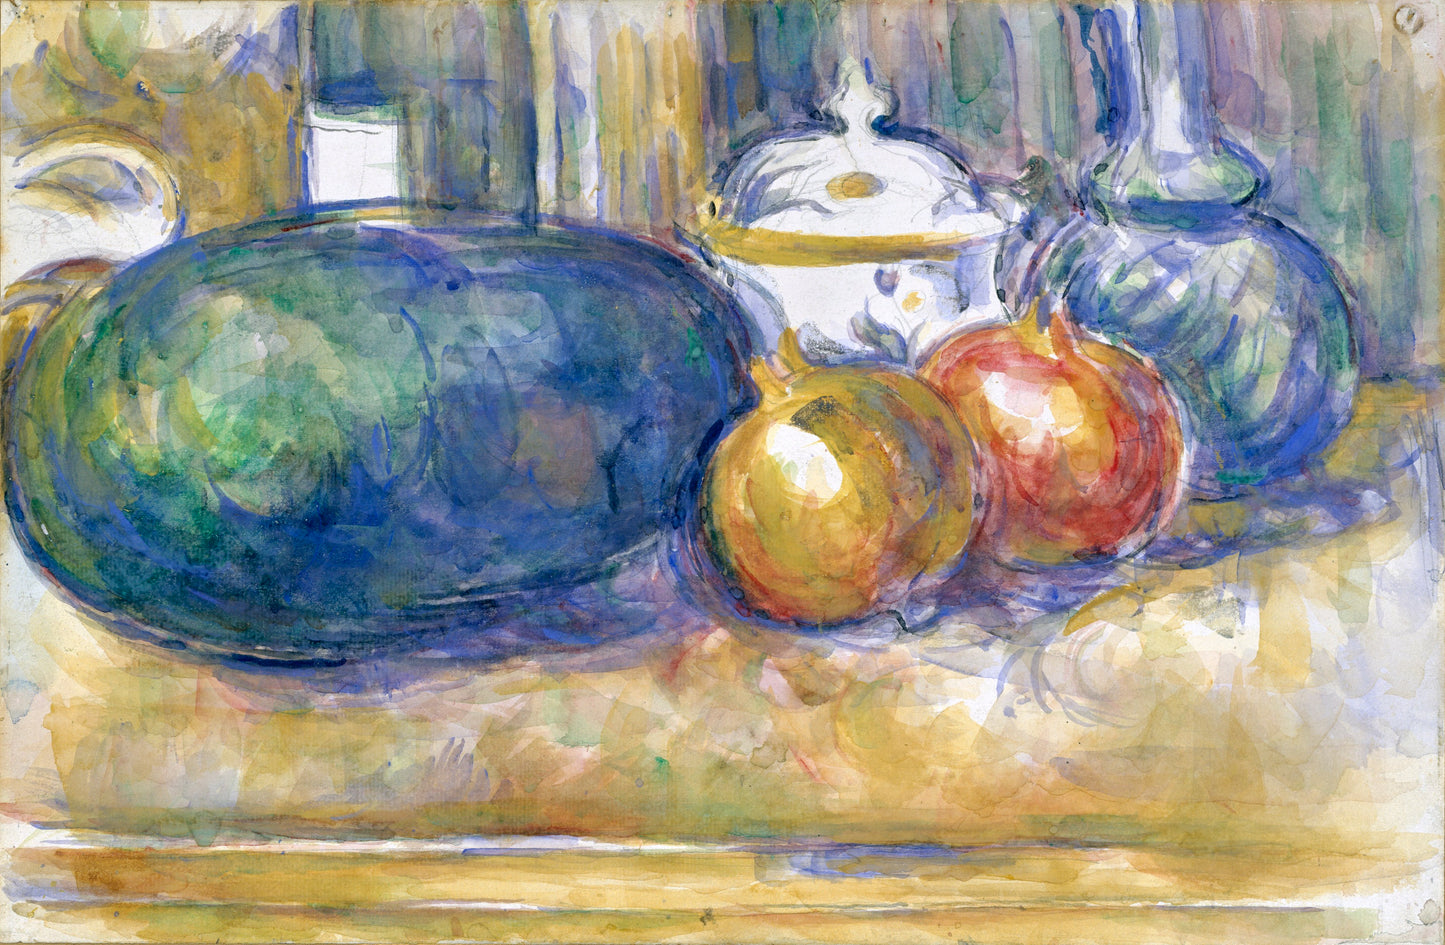 Paul Cezanne - Still-Life with a Watermelon and Pomegranates 1900 - Digital Art - JPG File Download